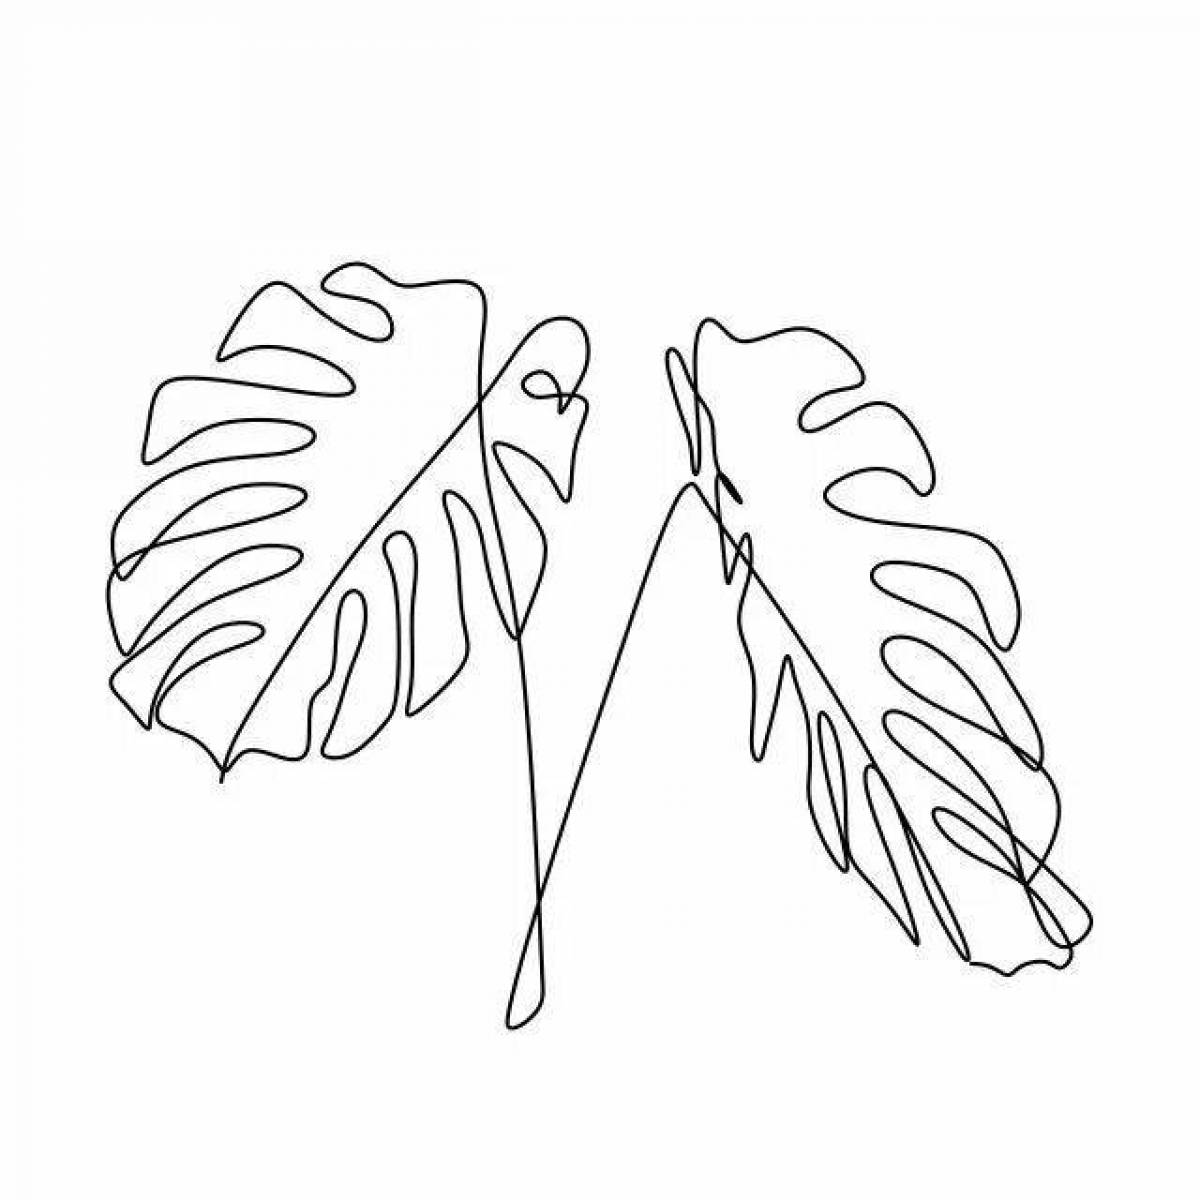 Coloring page charming monstera